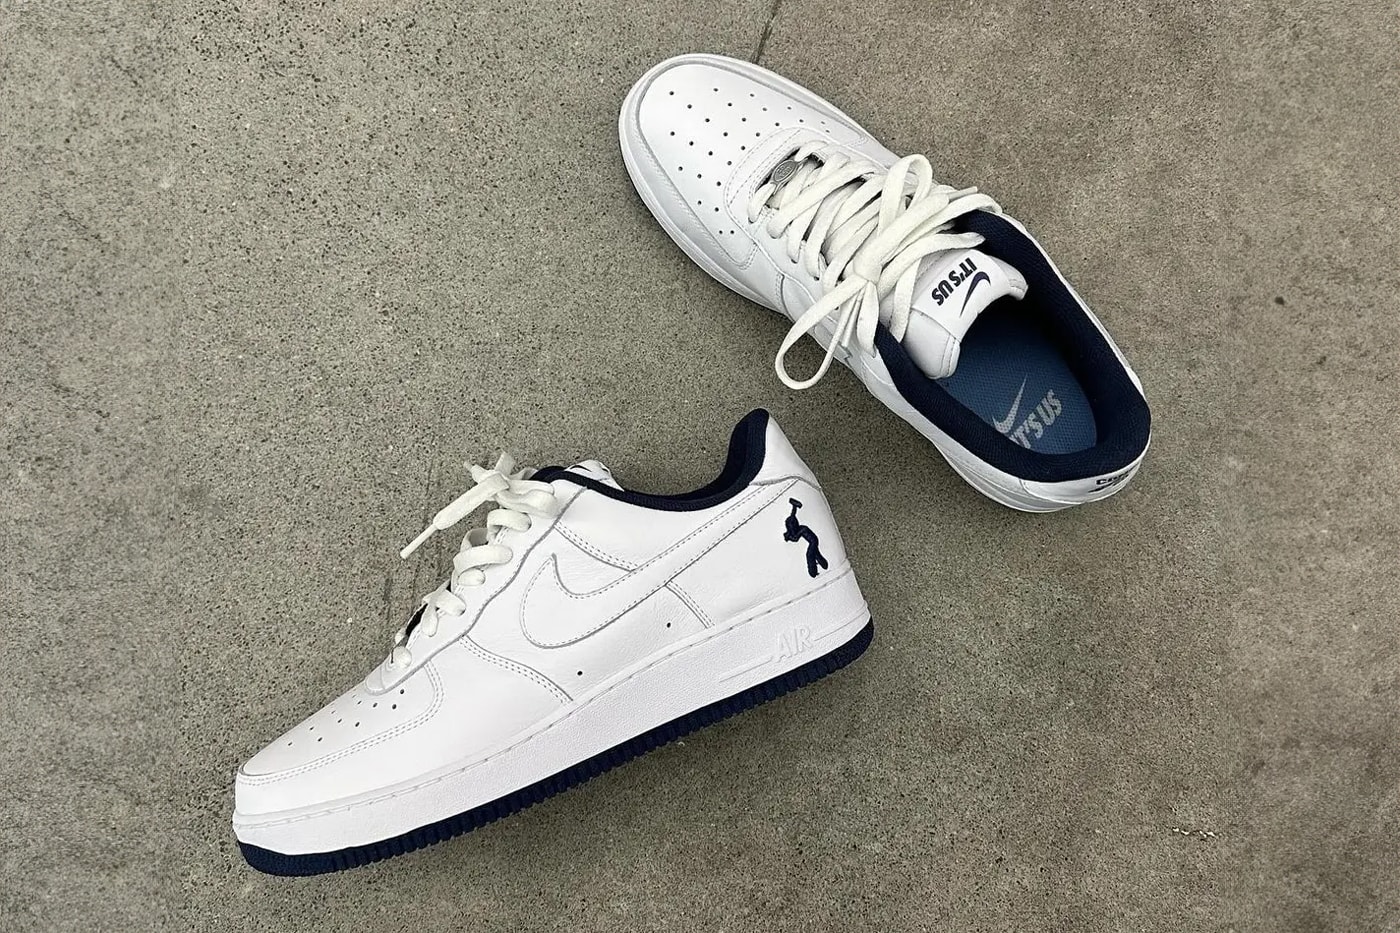 Lil Yachty Reveals Exclusive Friends-And-Family Nike Air Force 1s rapper drake instagram close friends navy accents white insole concrete boys logo